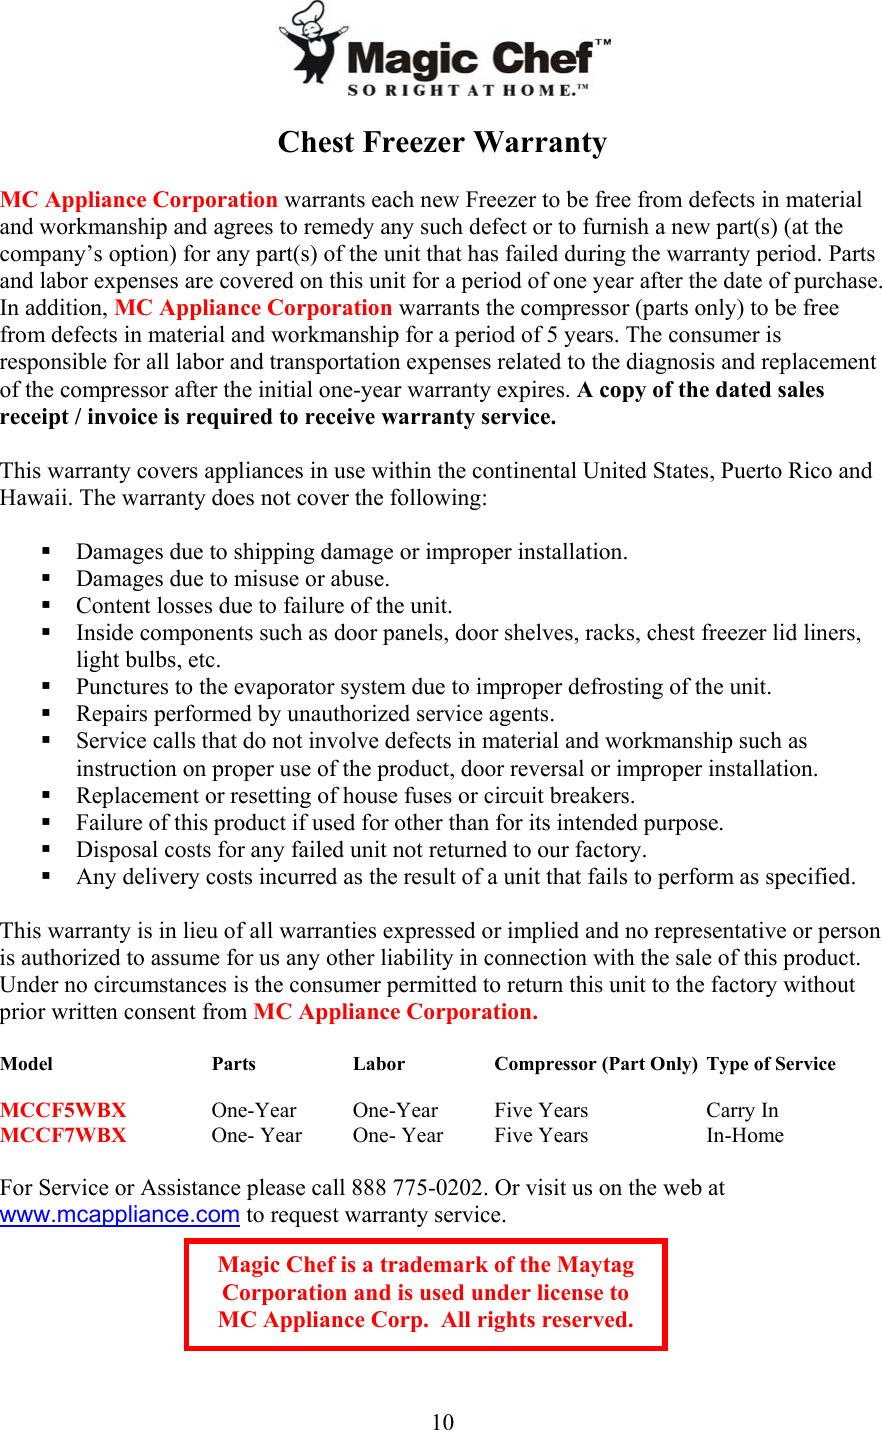 Page 11 of 11 - Magic-Chef Magic-Chef-Mccf7Wbx-Owners-Manual - Manual For Chest Freezer _English_ 4.30.08 _confirmed_